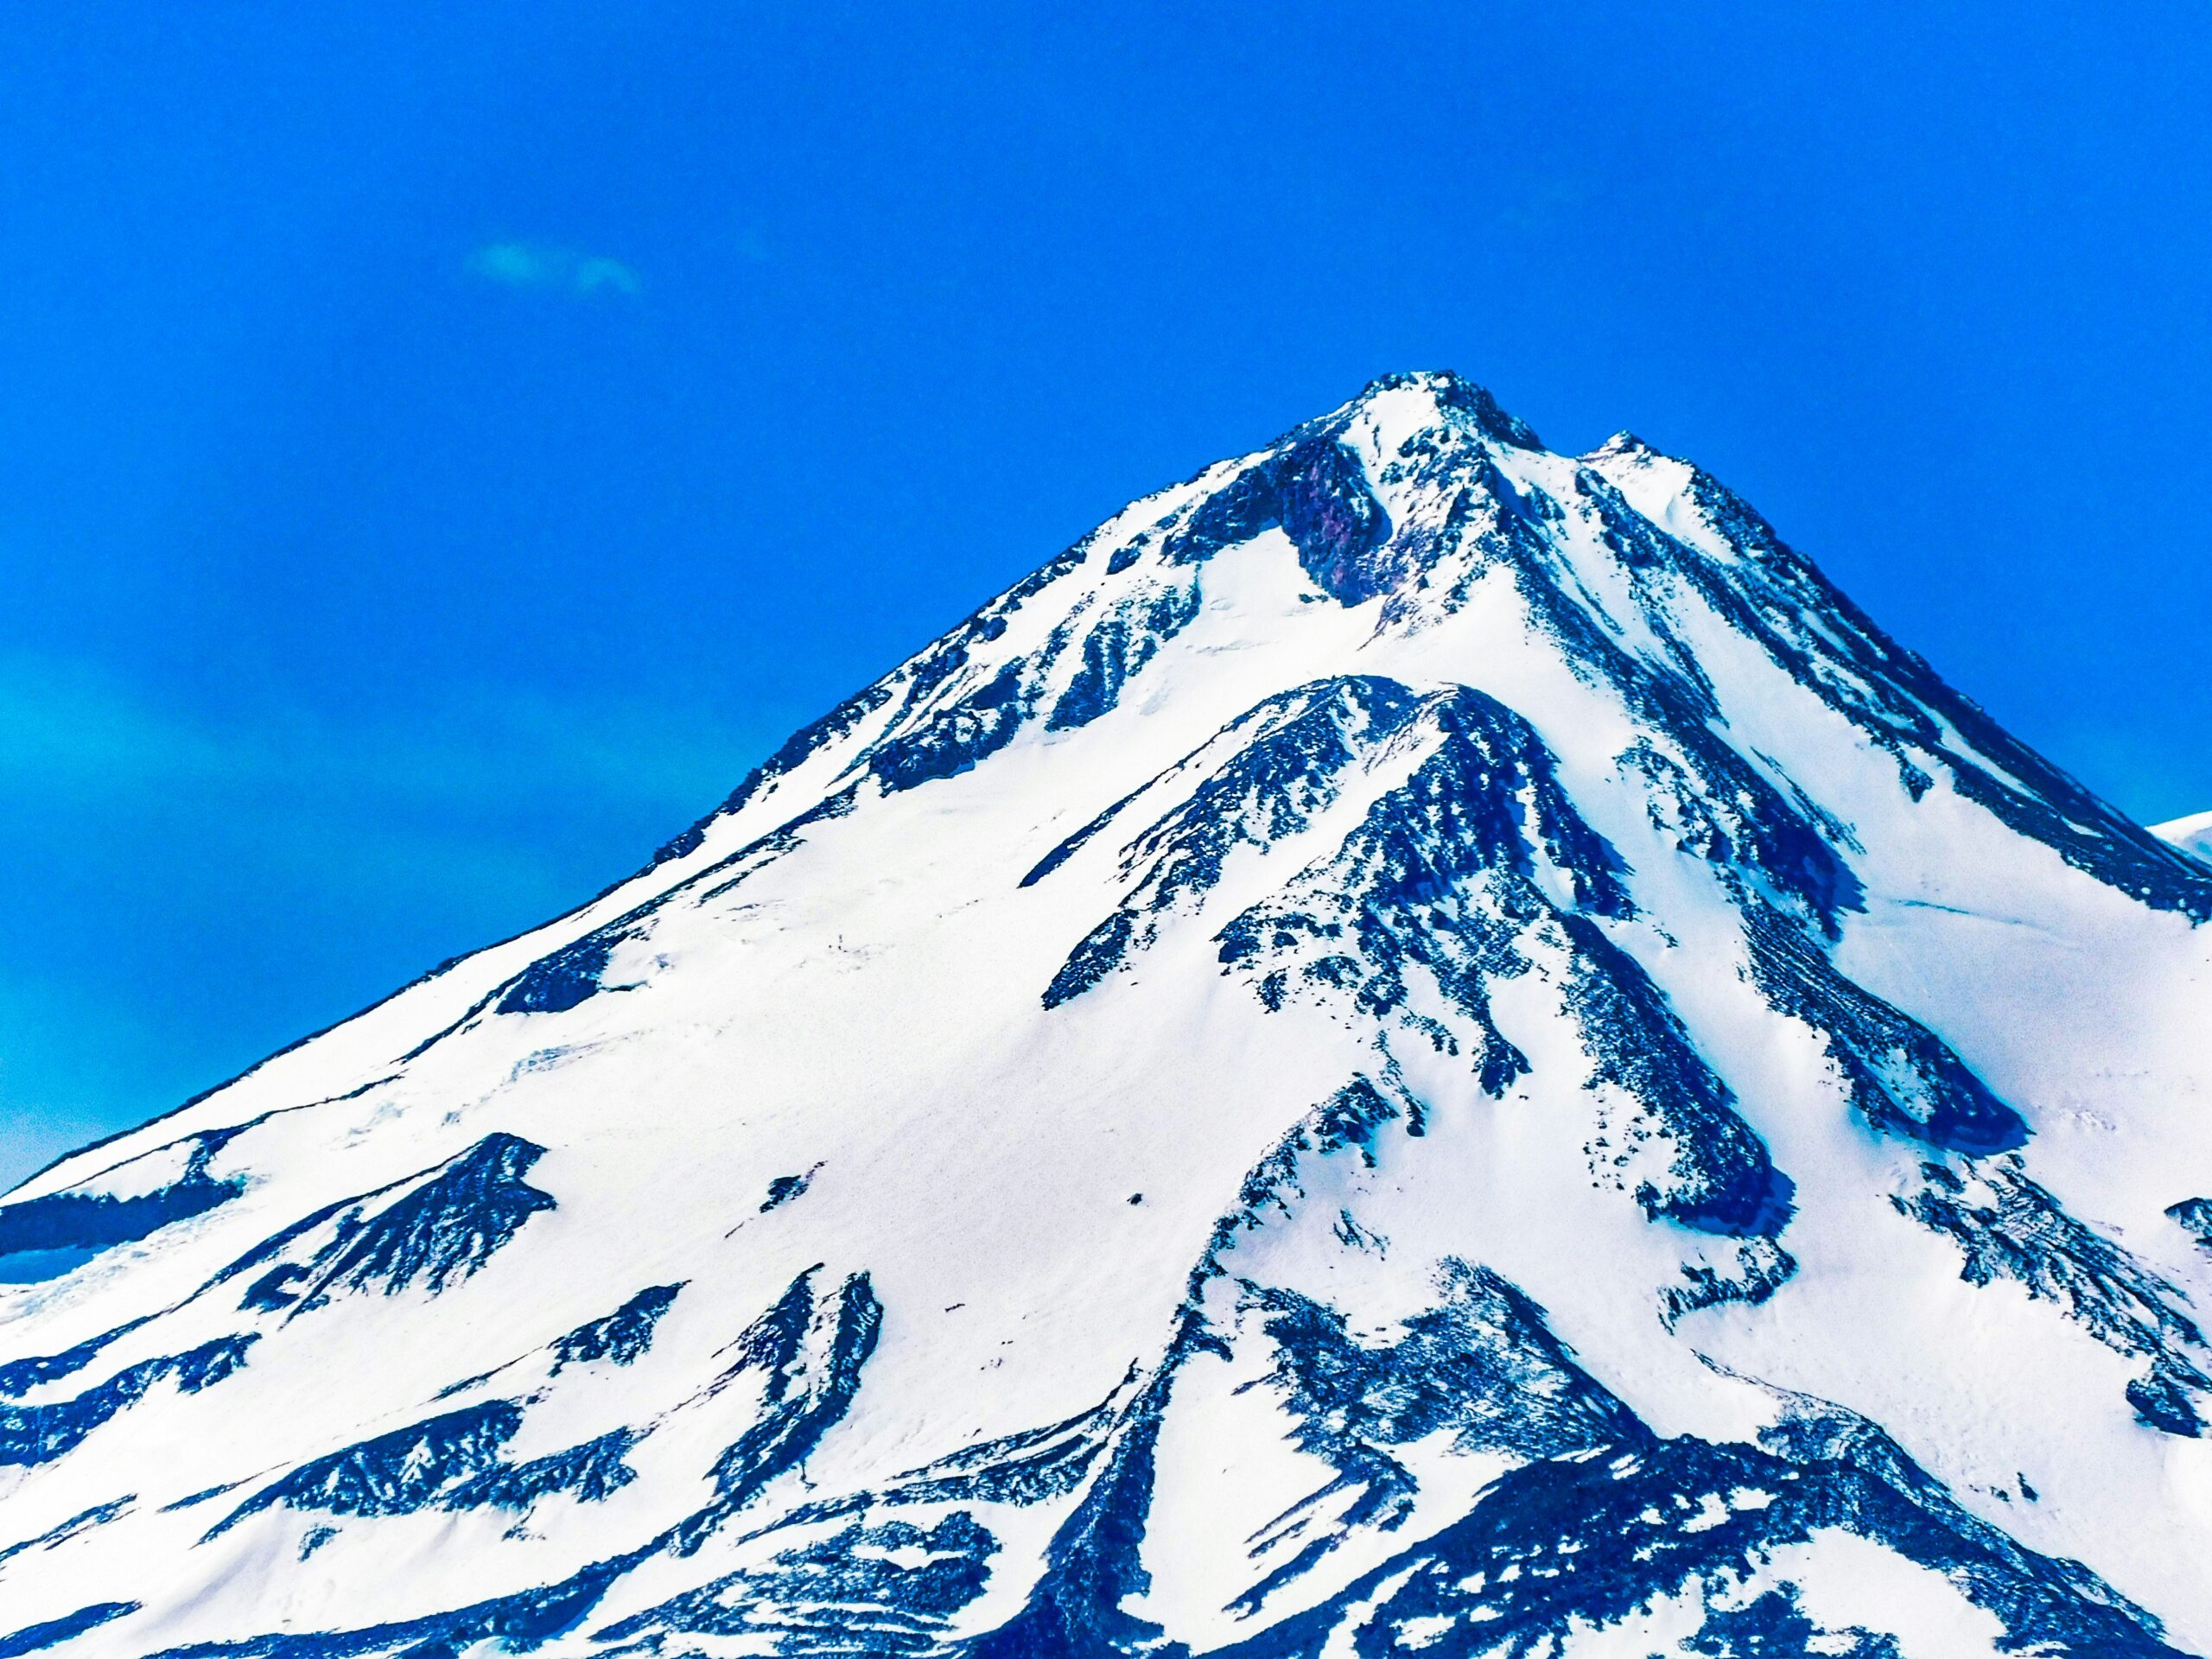 Can I Bring My Own Climbing Equipment For Mount Shasta?